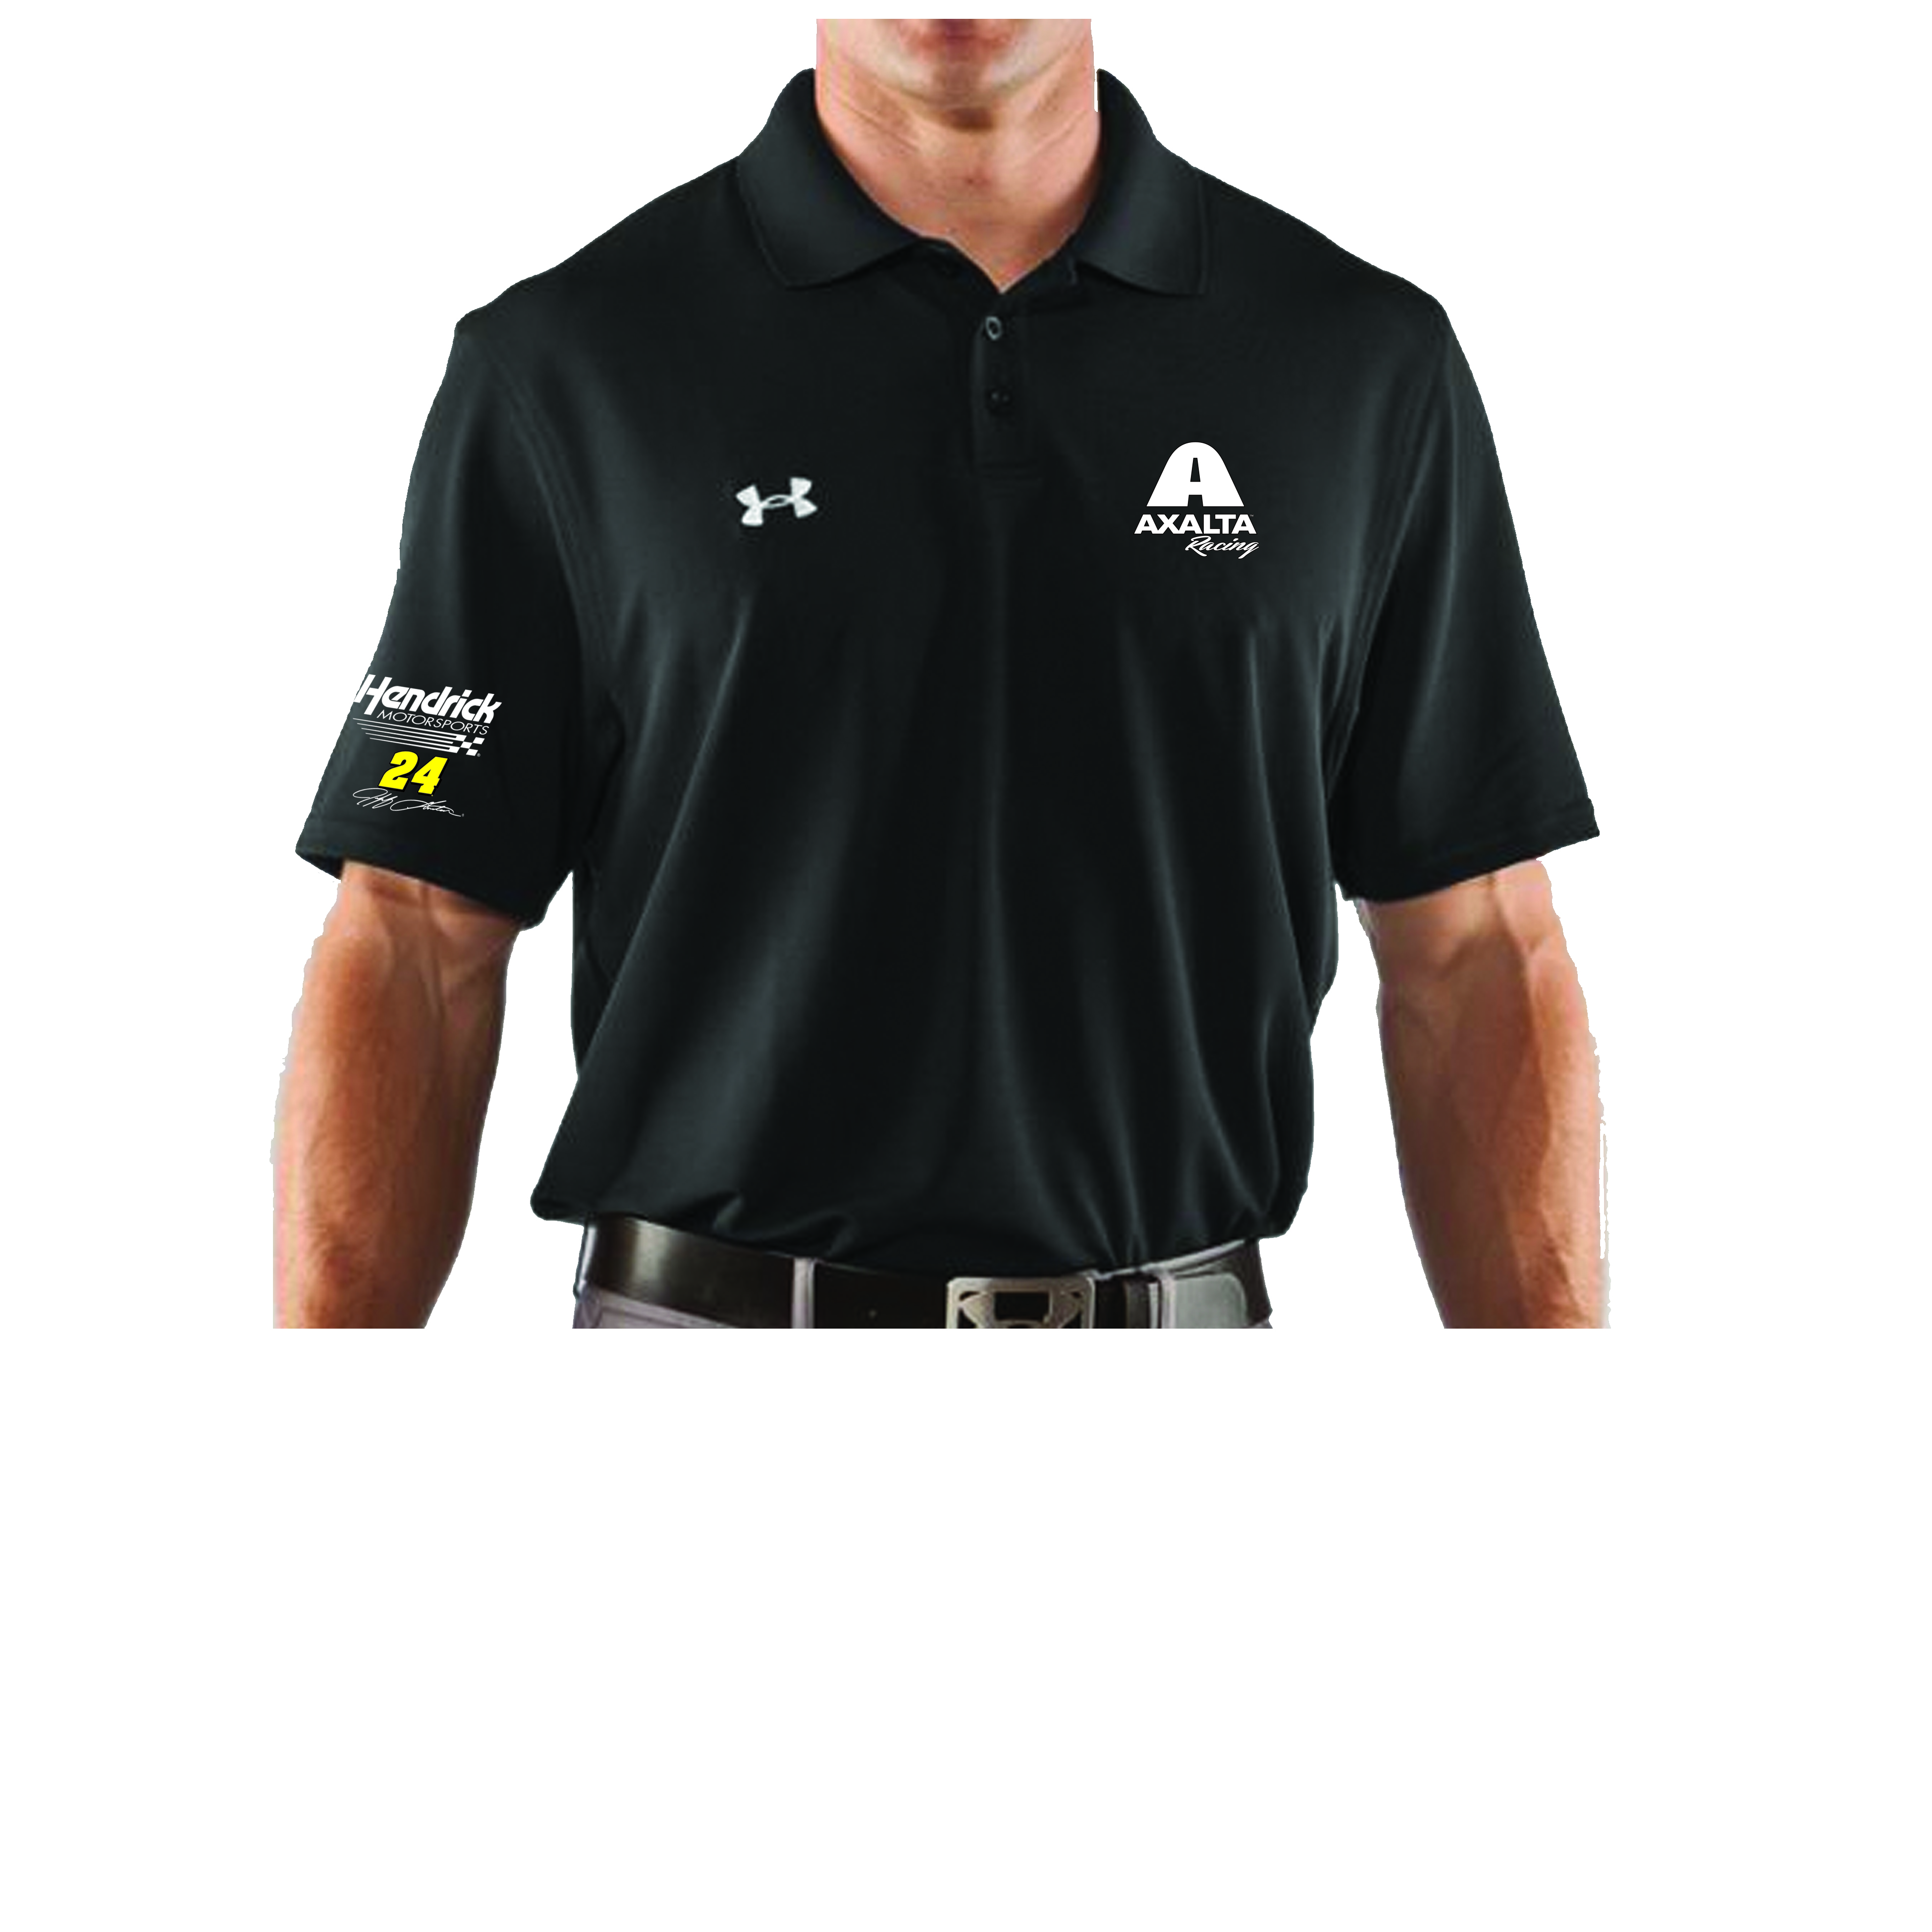 Cheap under armour shirts with company 